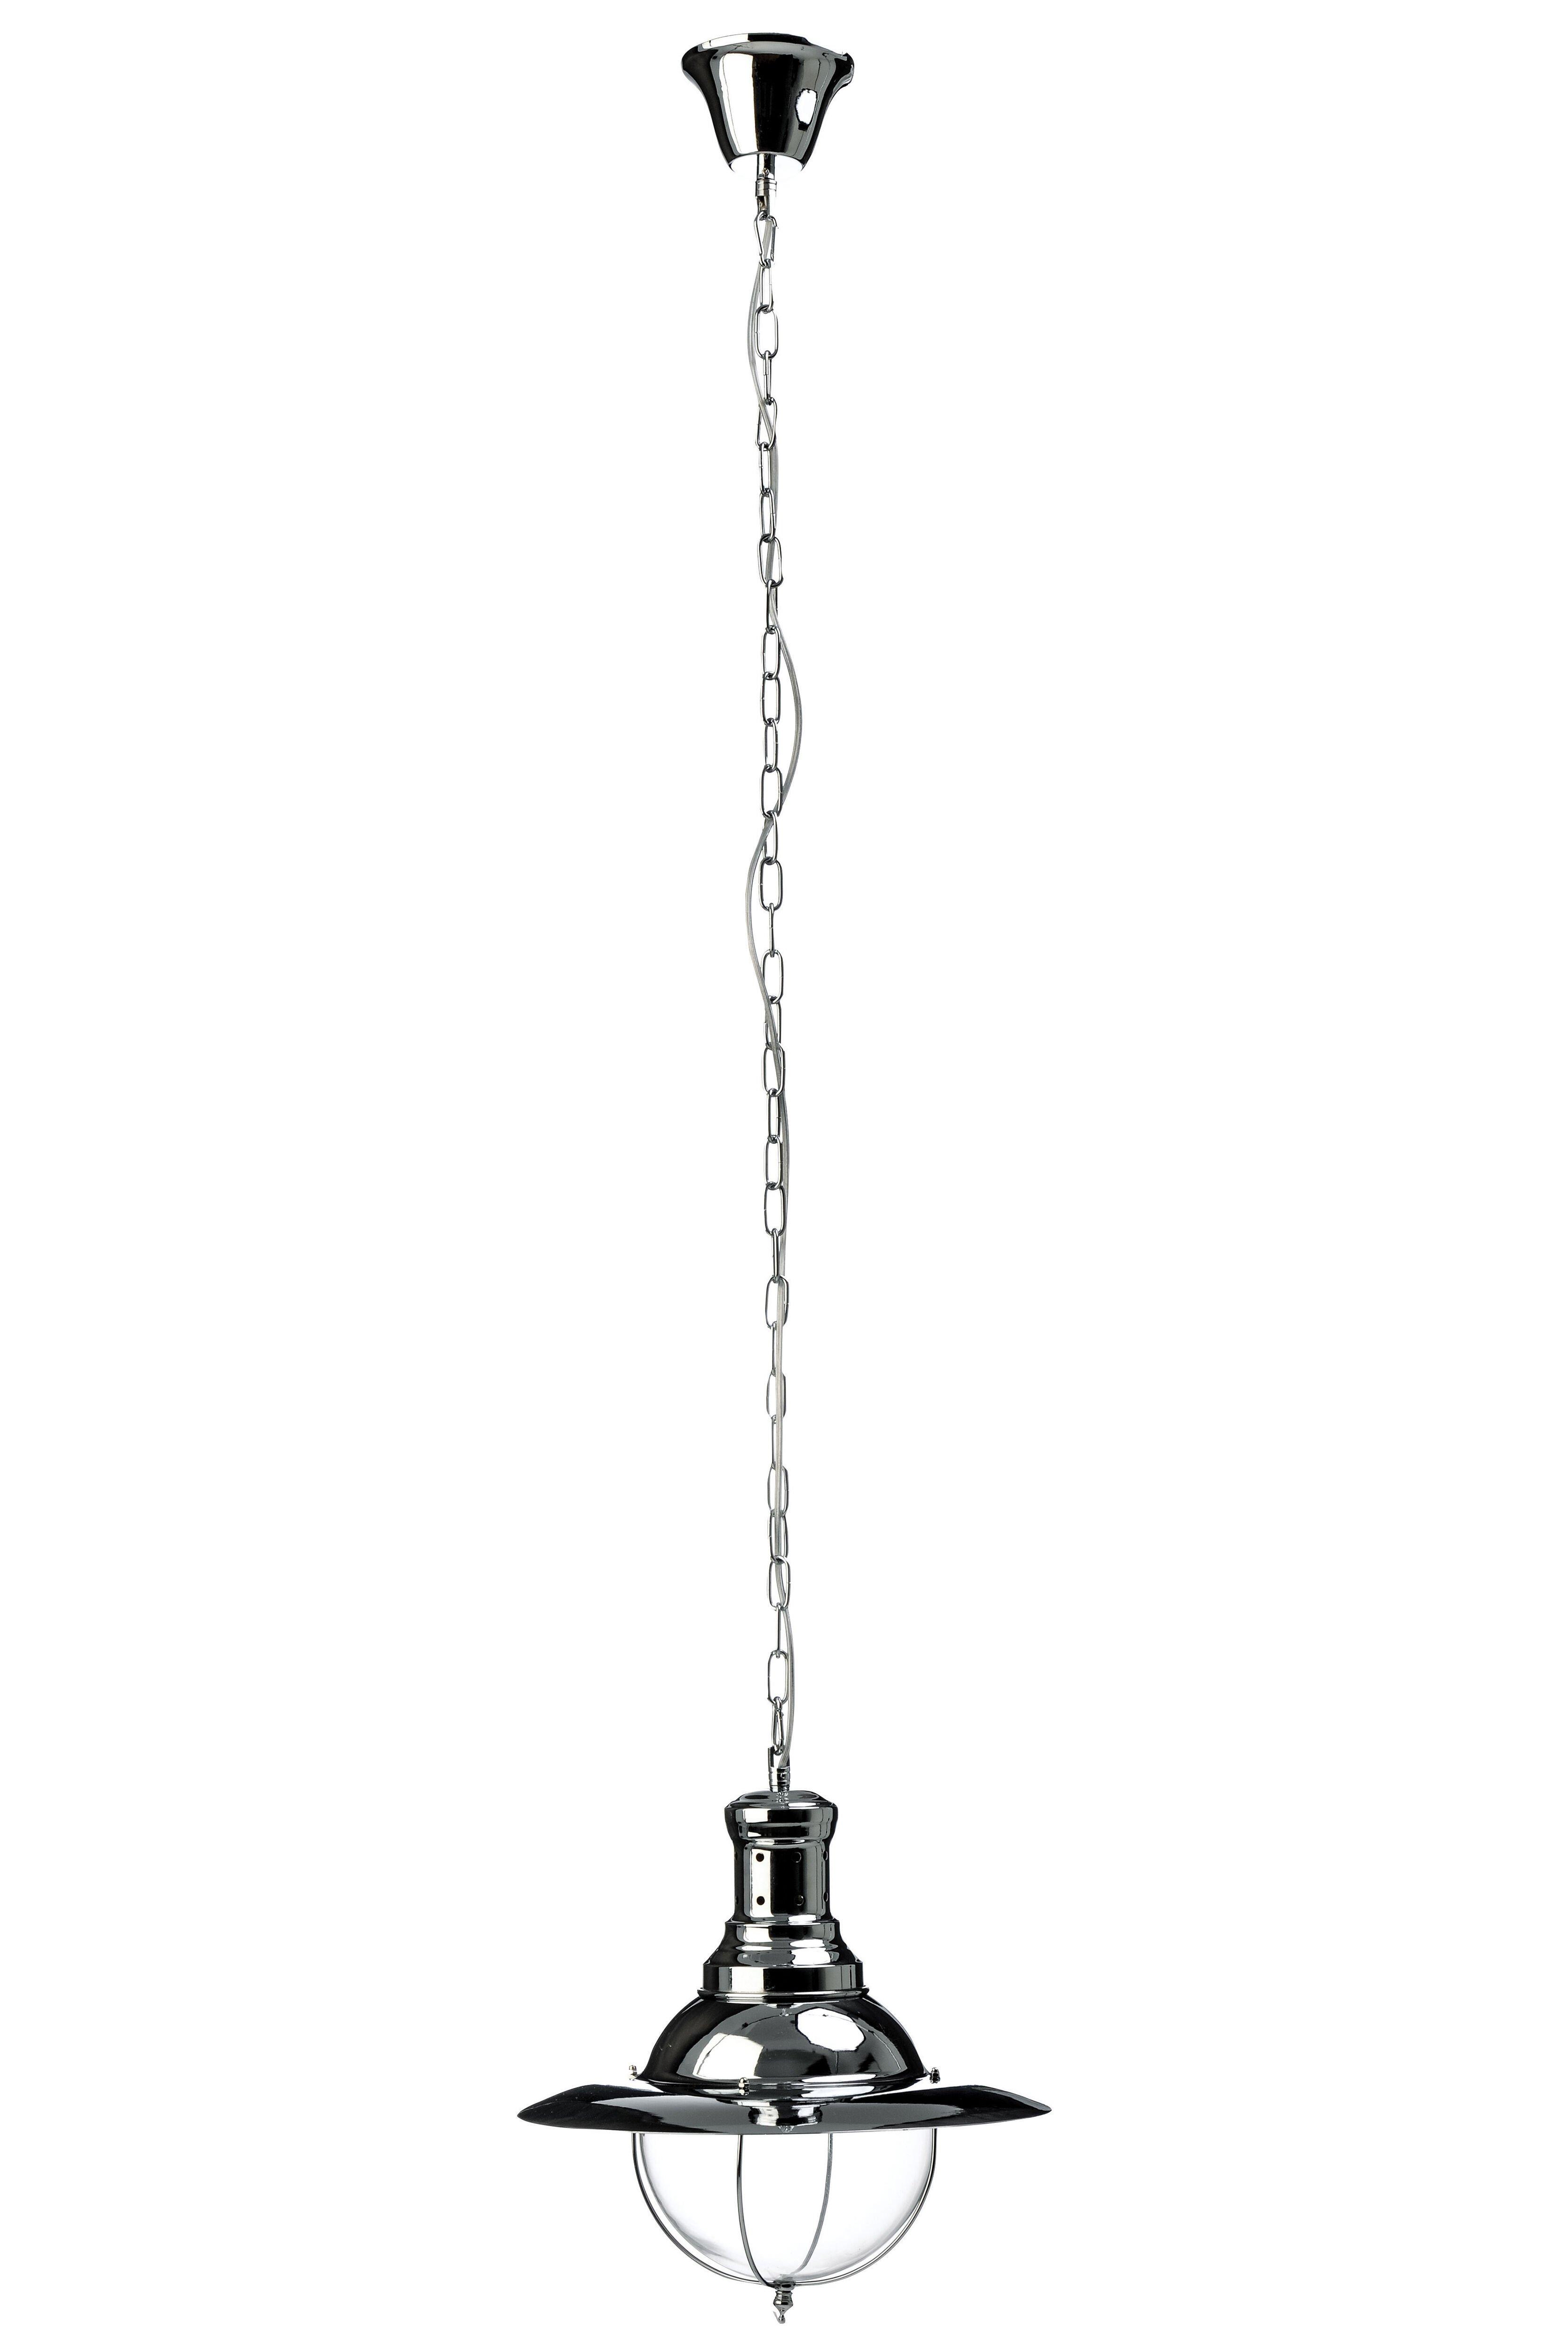 Interiors by Premier Industrial Chrome And Glass Pendant Light